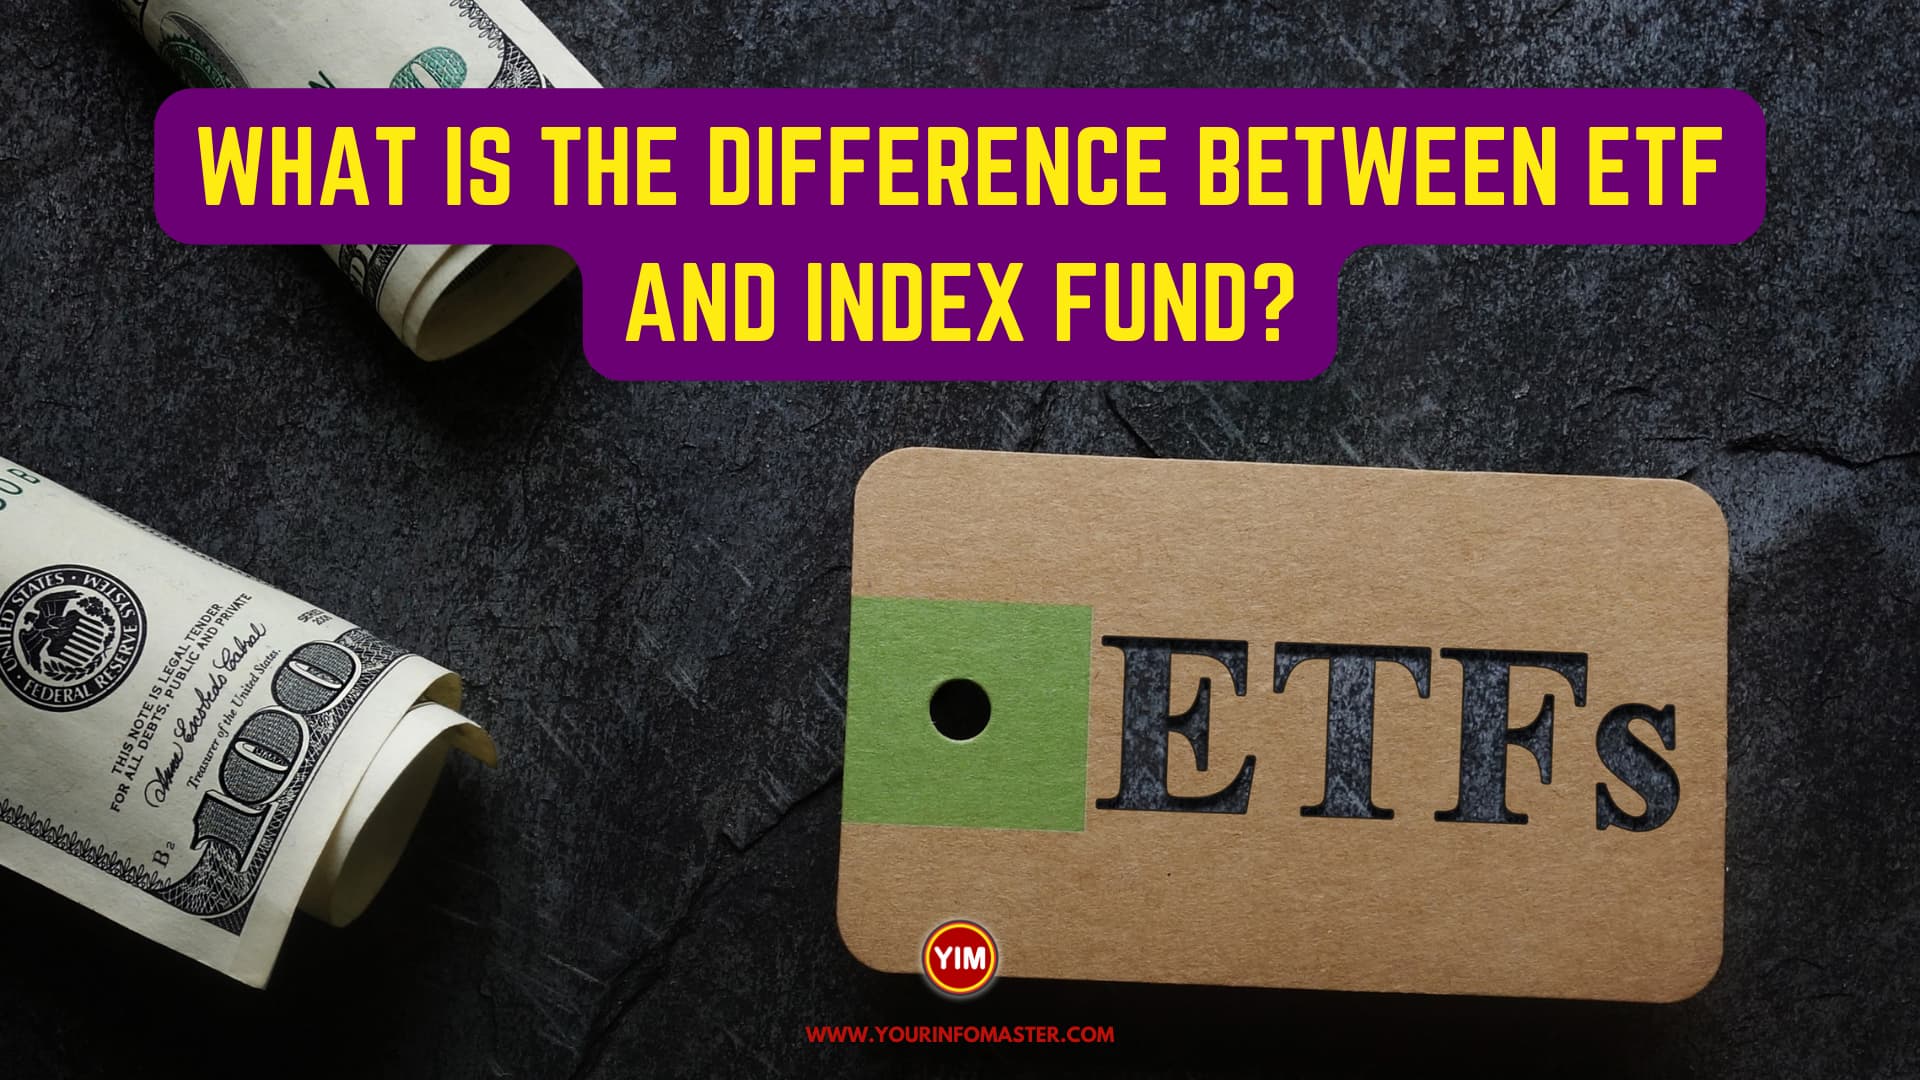 What is the difference between ETF and index fund